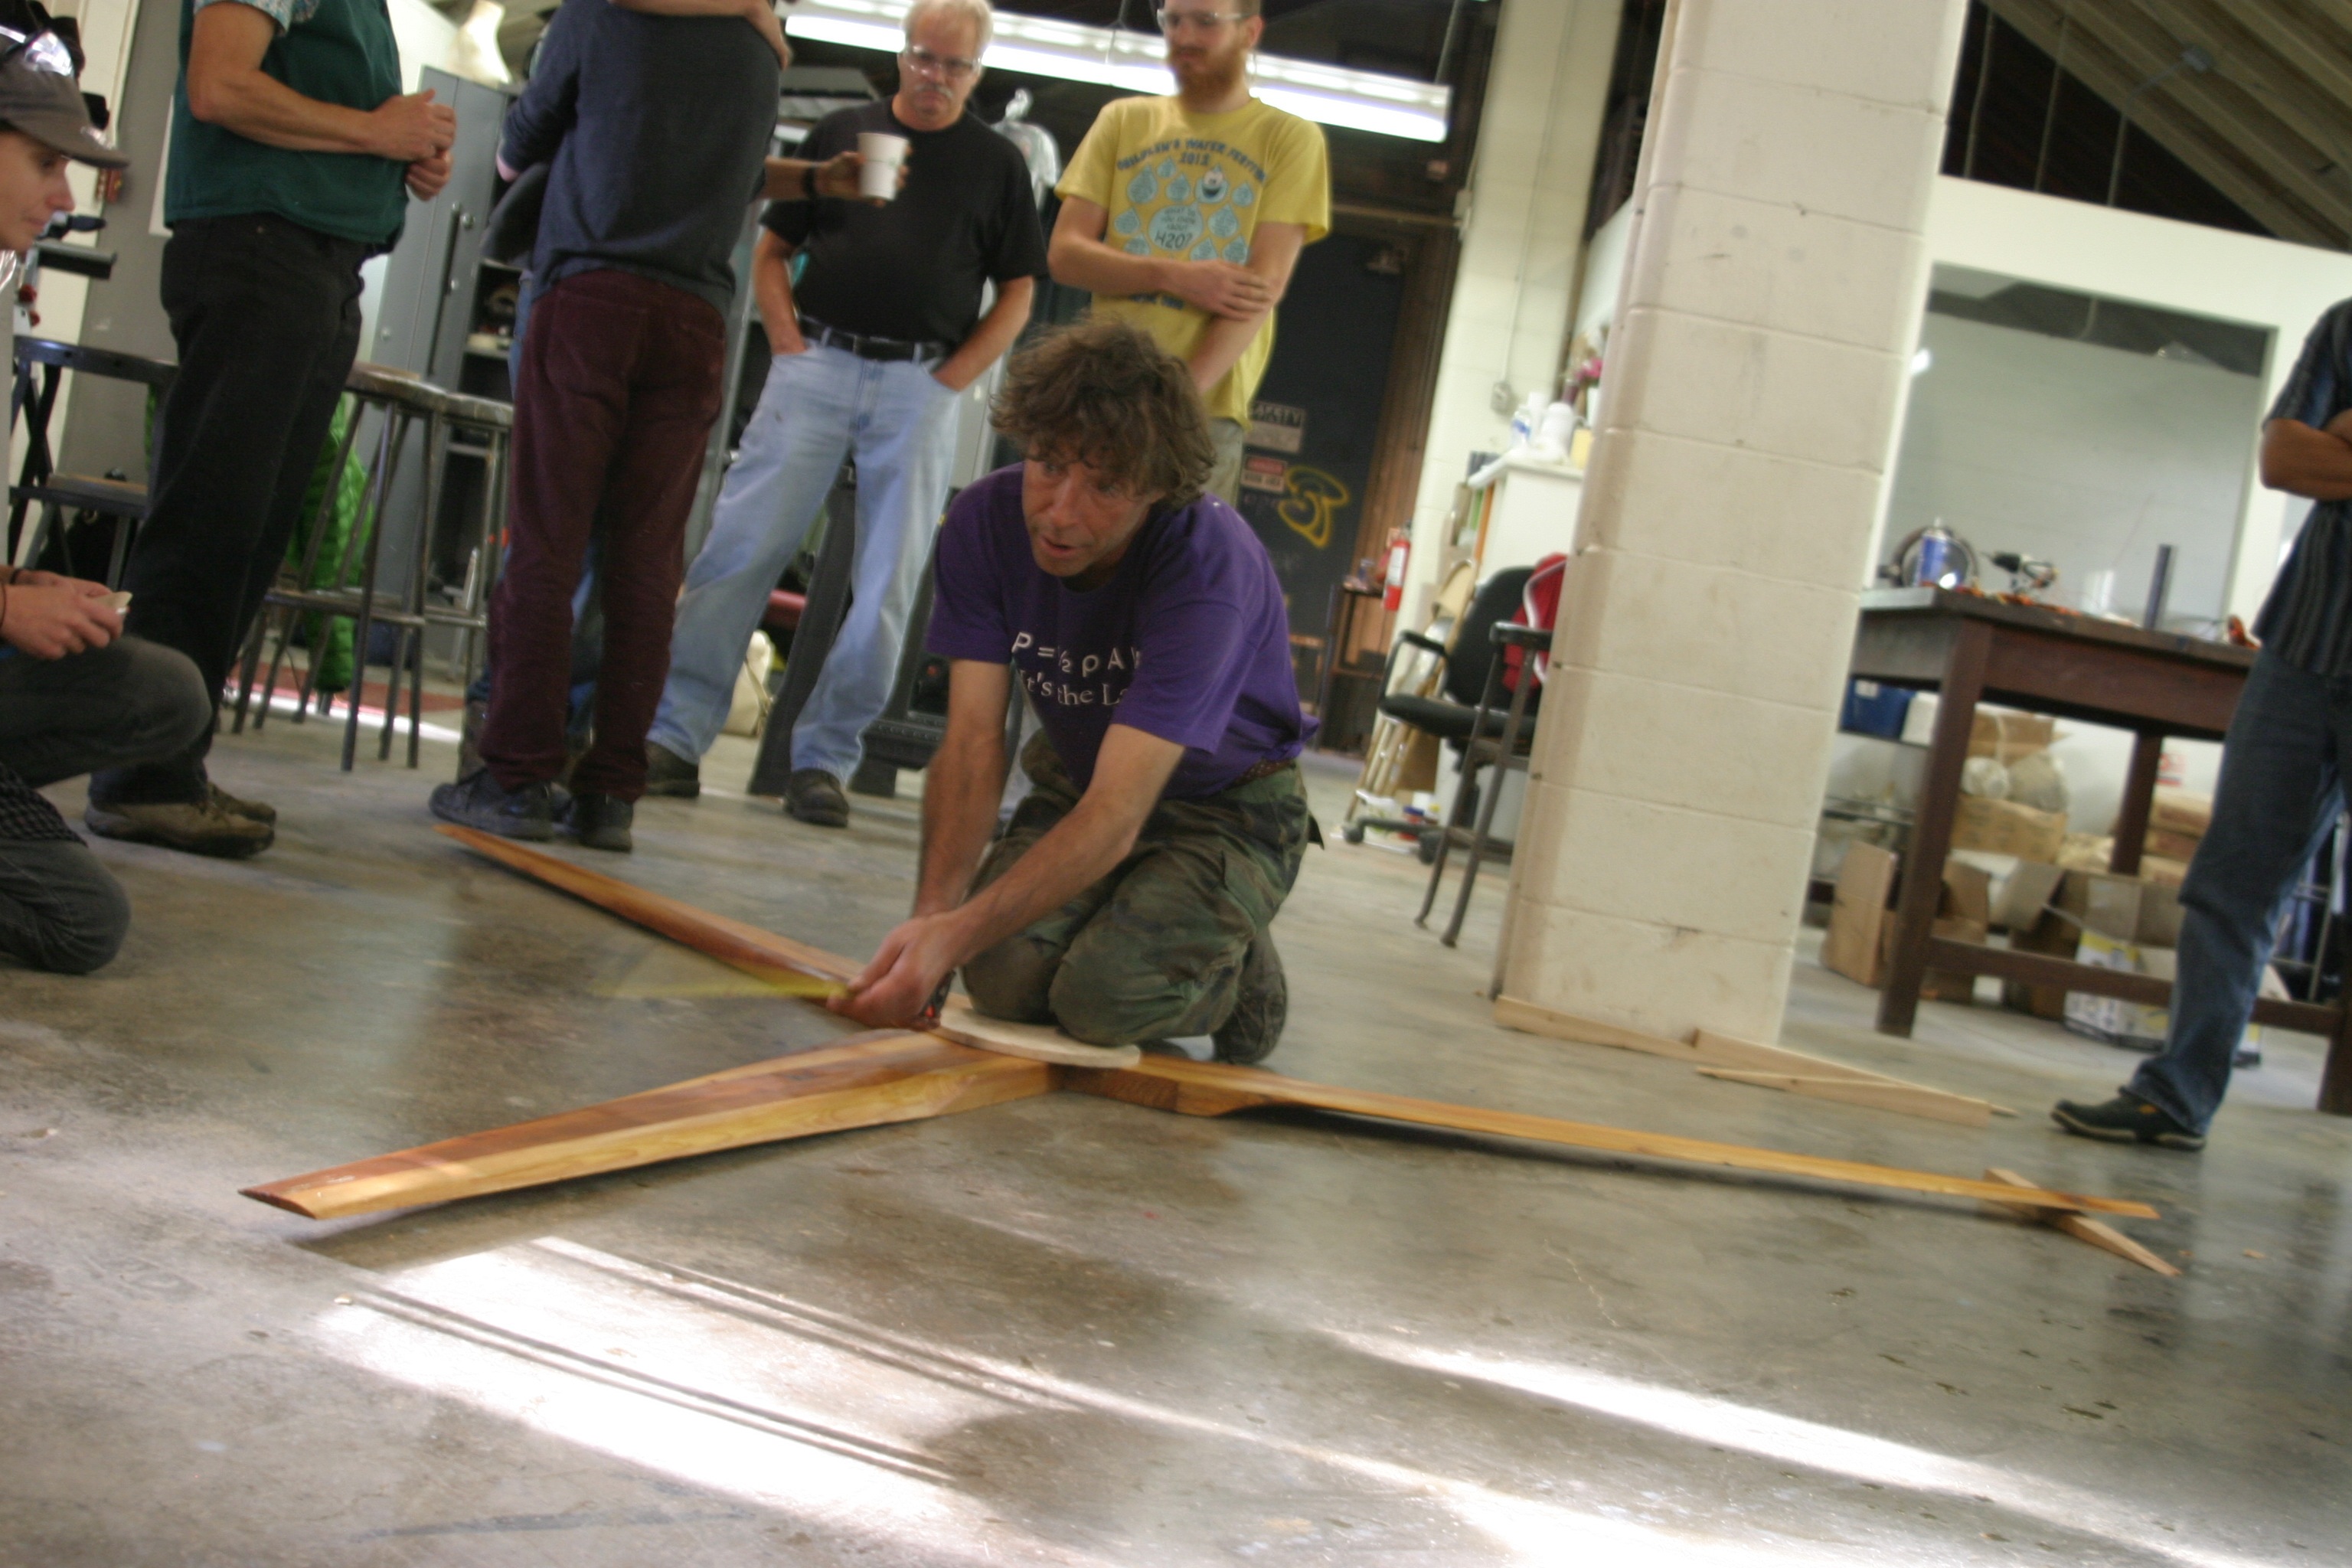 Homebrew wind power class, Antioch College, Yellow Springs, Ohio 2014